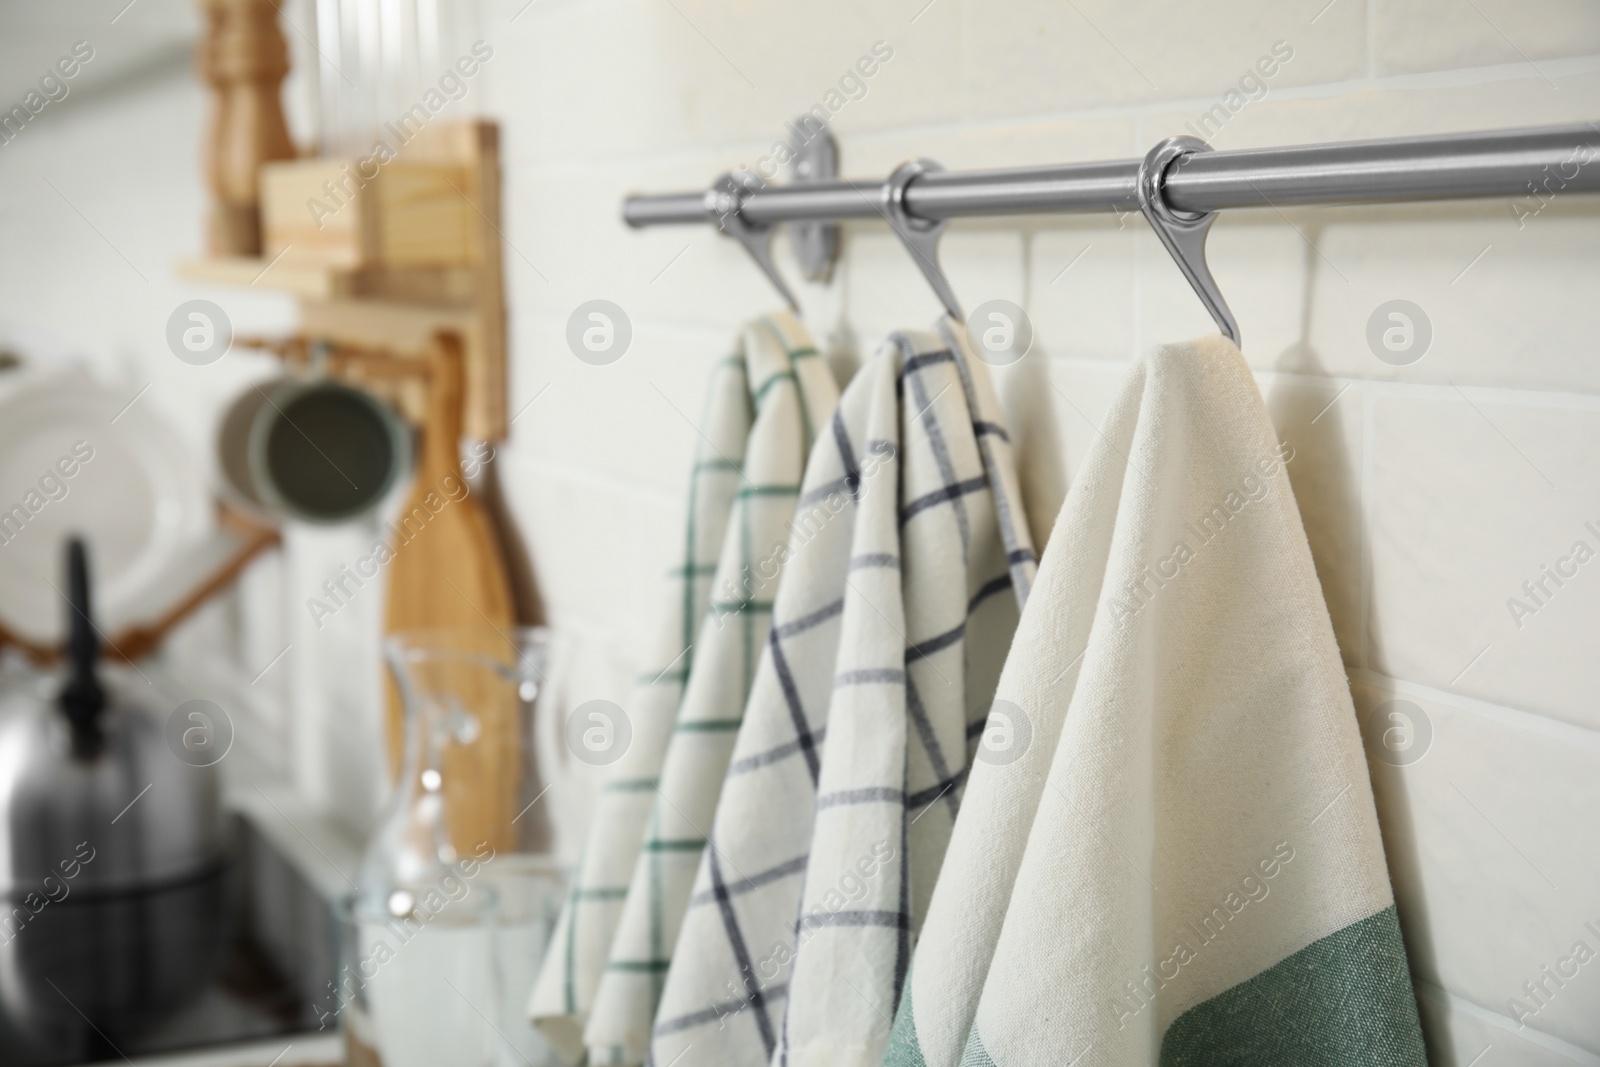 Photo of Different clean towels hanging on rack in kitchen